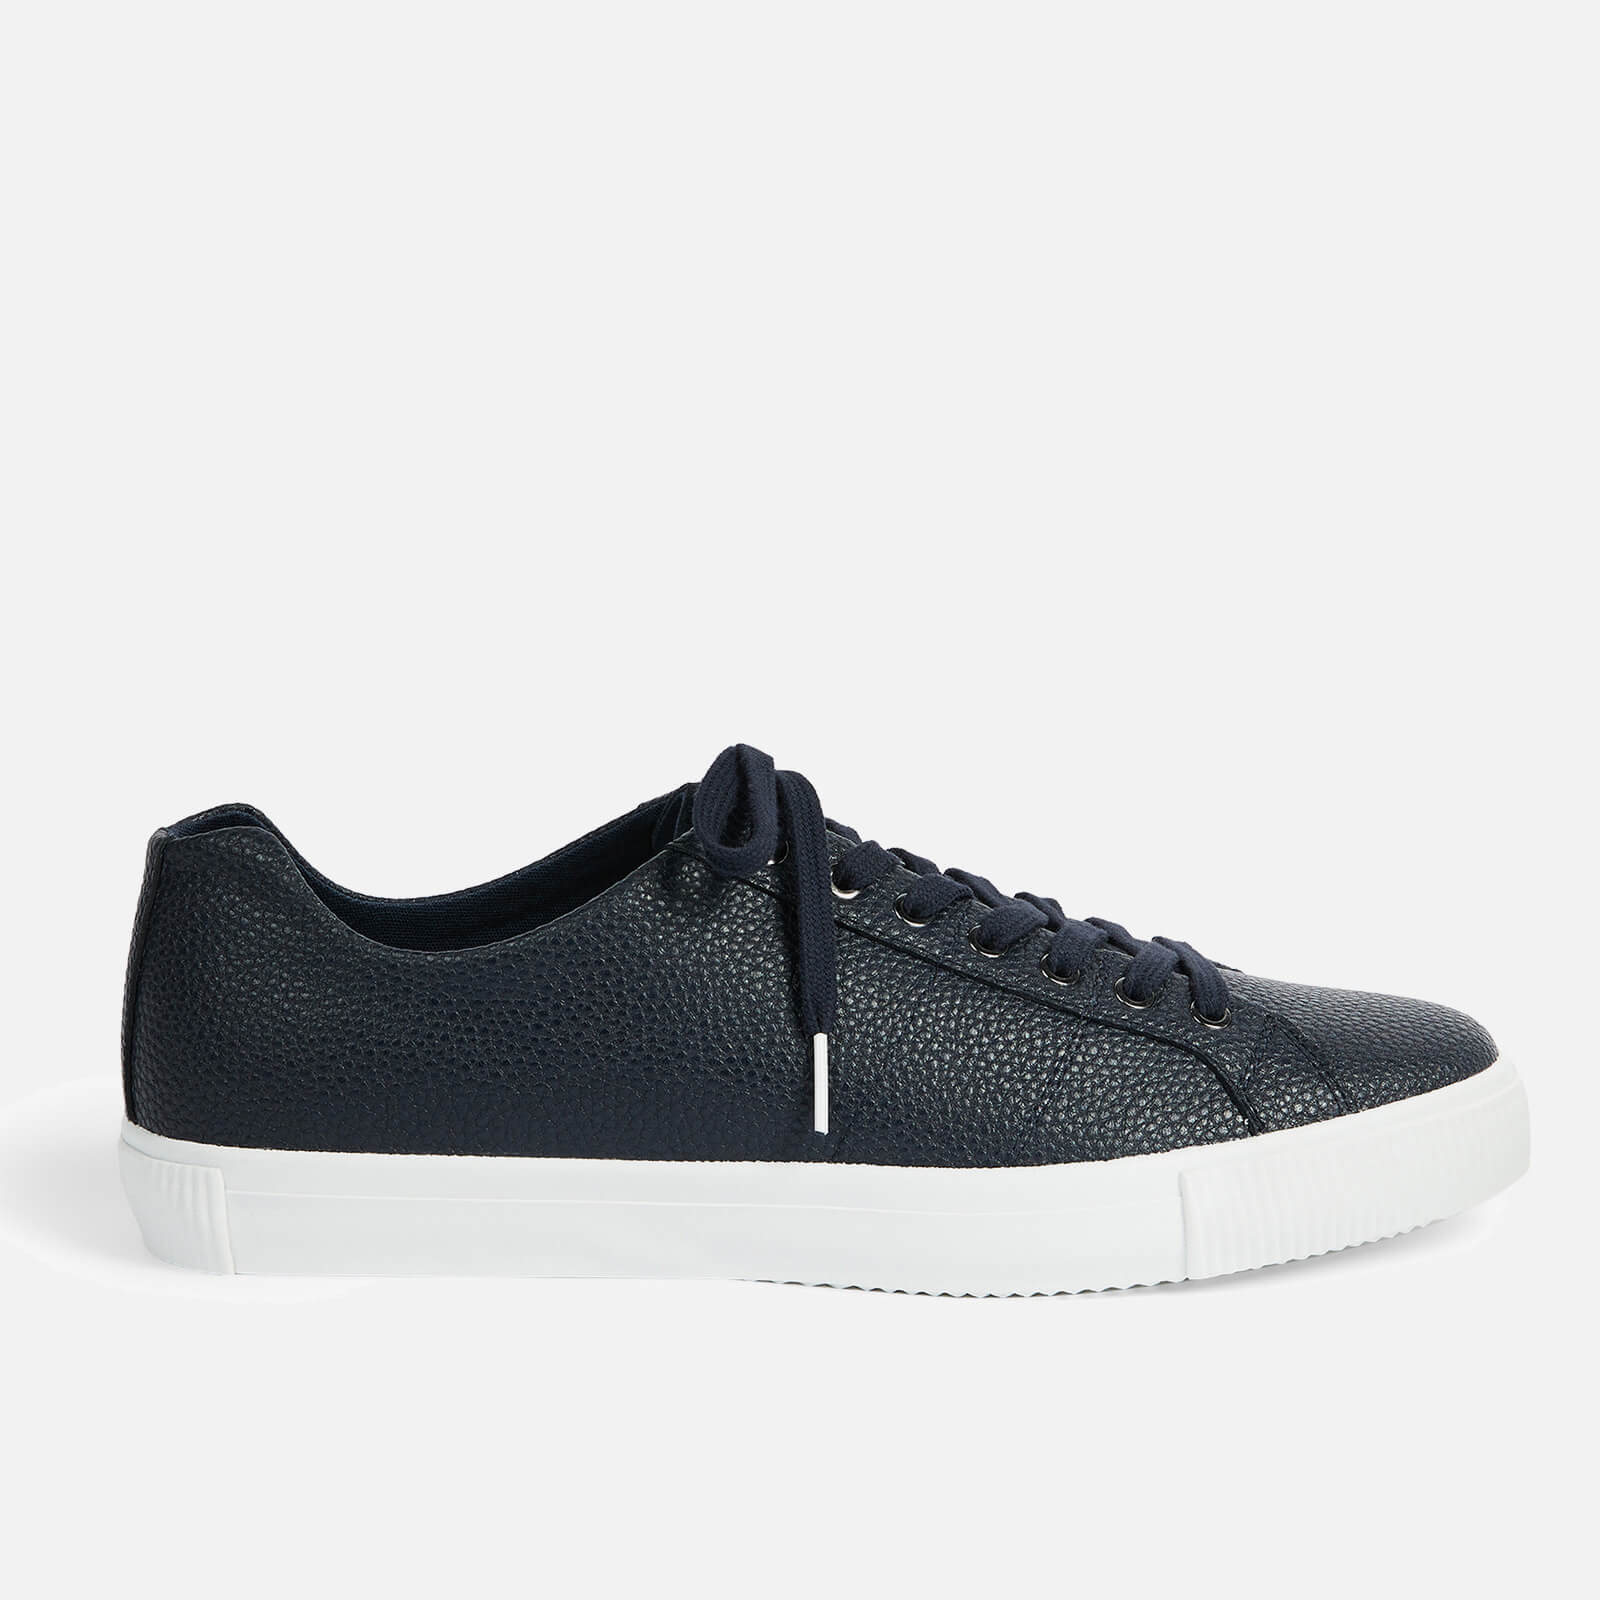 Ted Baker Men's Borage Cupsole Trainers - Navy - UK 7